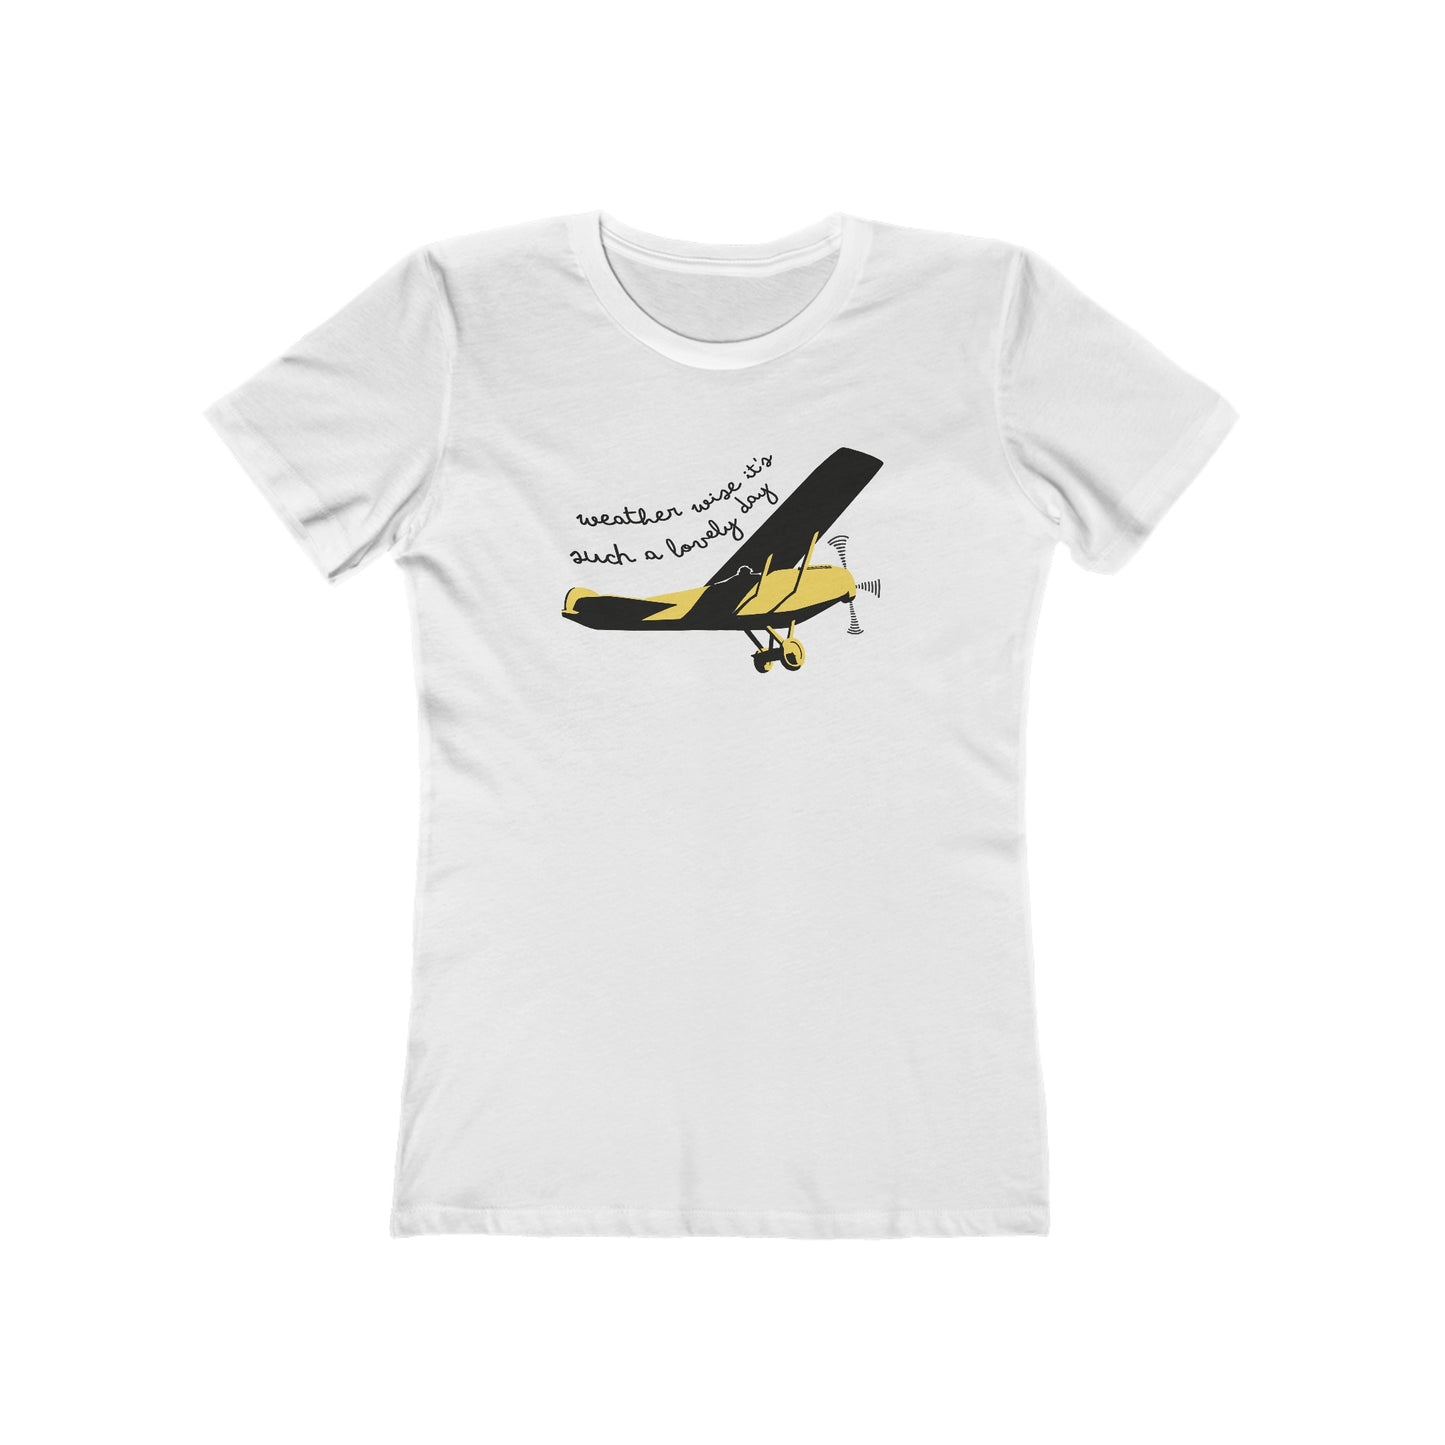 Come Fly With Me - Women's T-Shirt